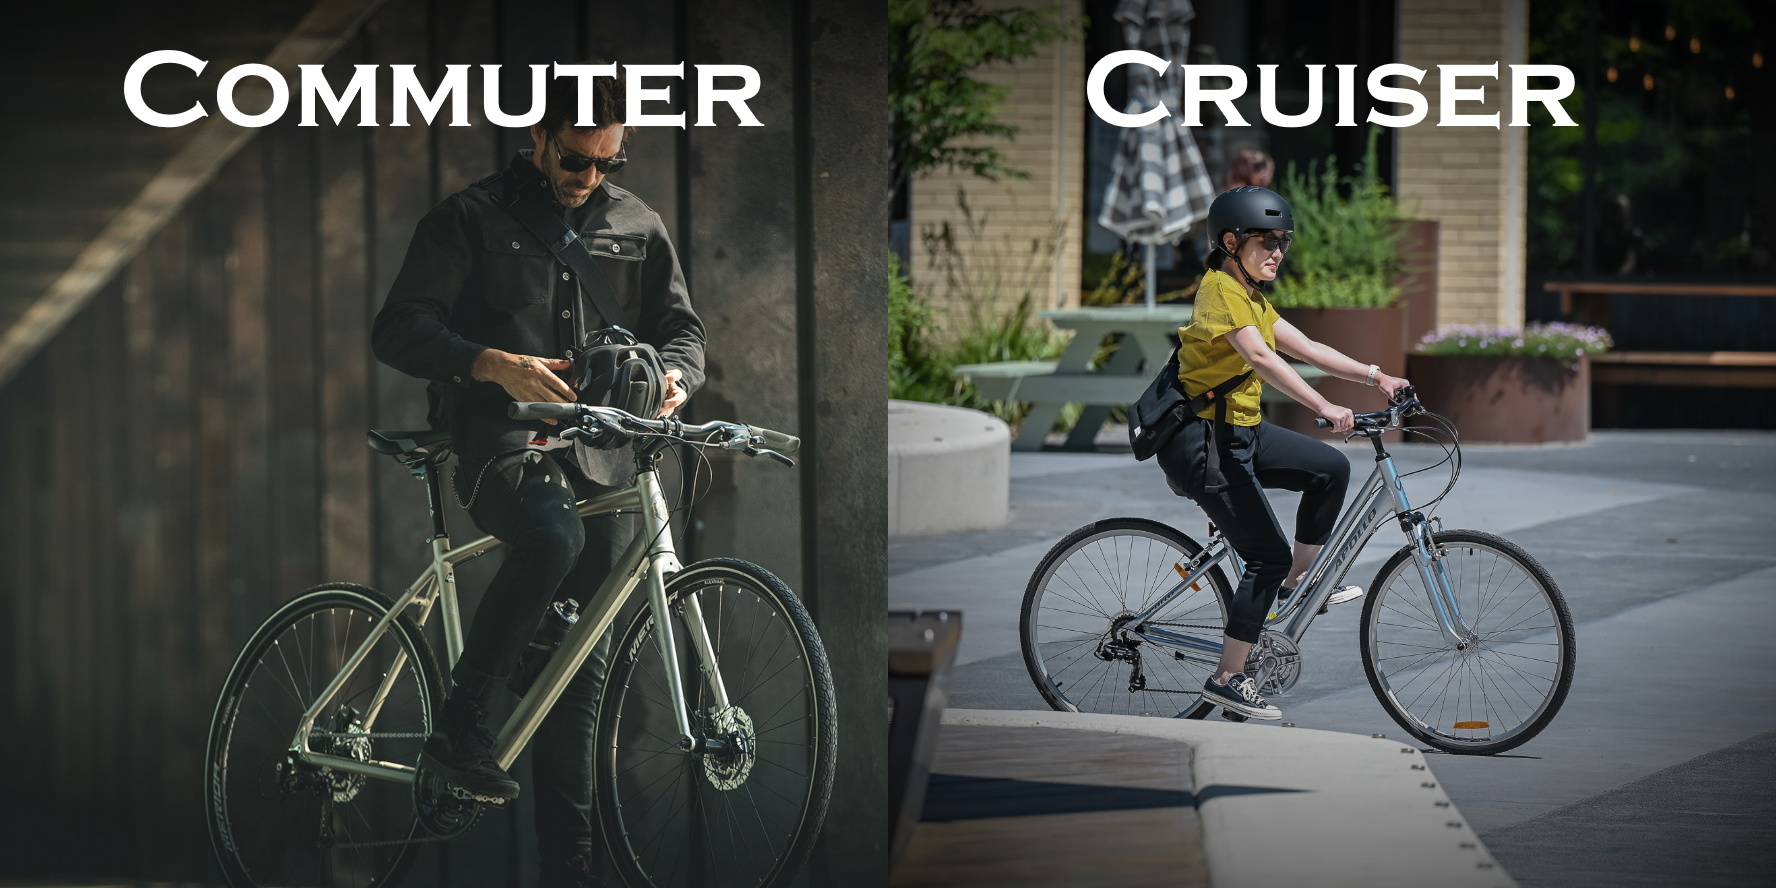 Commuter bicycles vs Cruiser bicycles